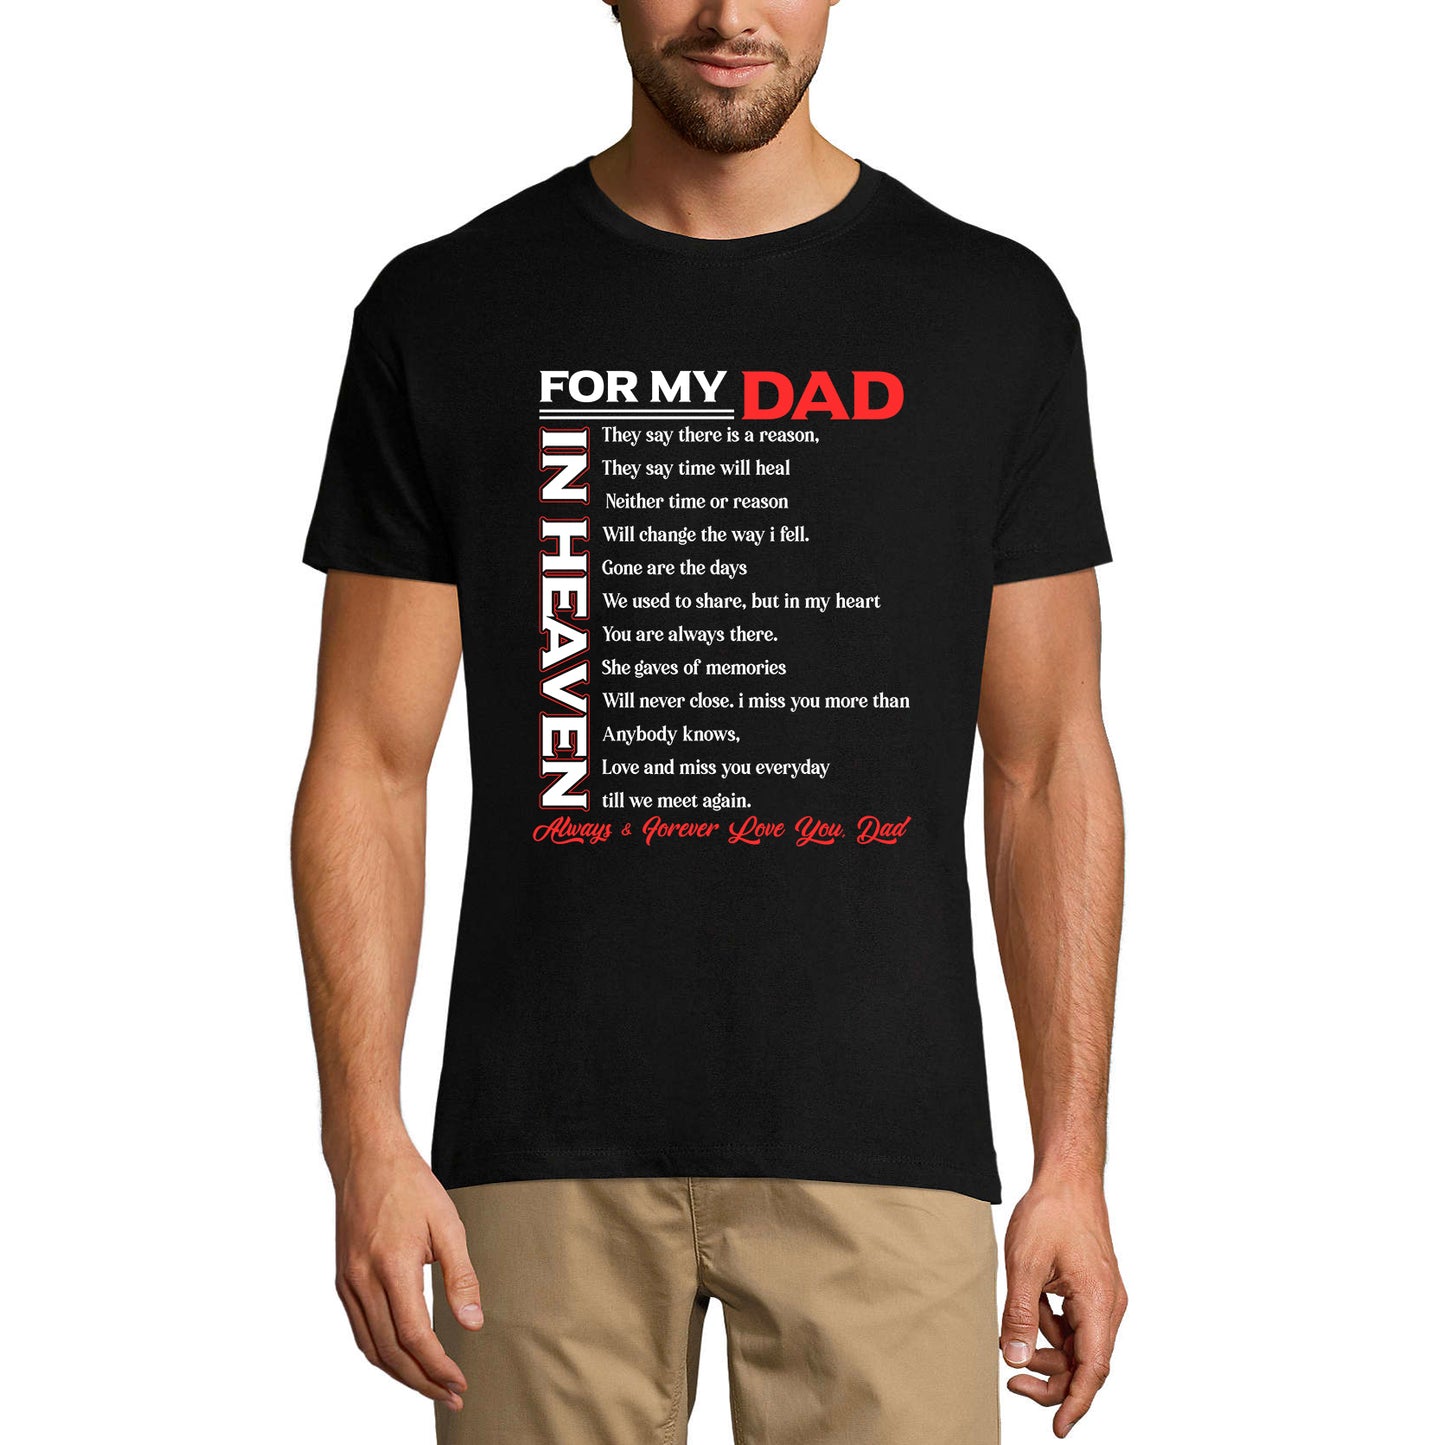 ULTRABASIC Men's Graphic T-Shirt For My Dad In Heaven - Emotional Quote - Father's Day